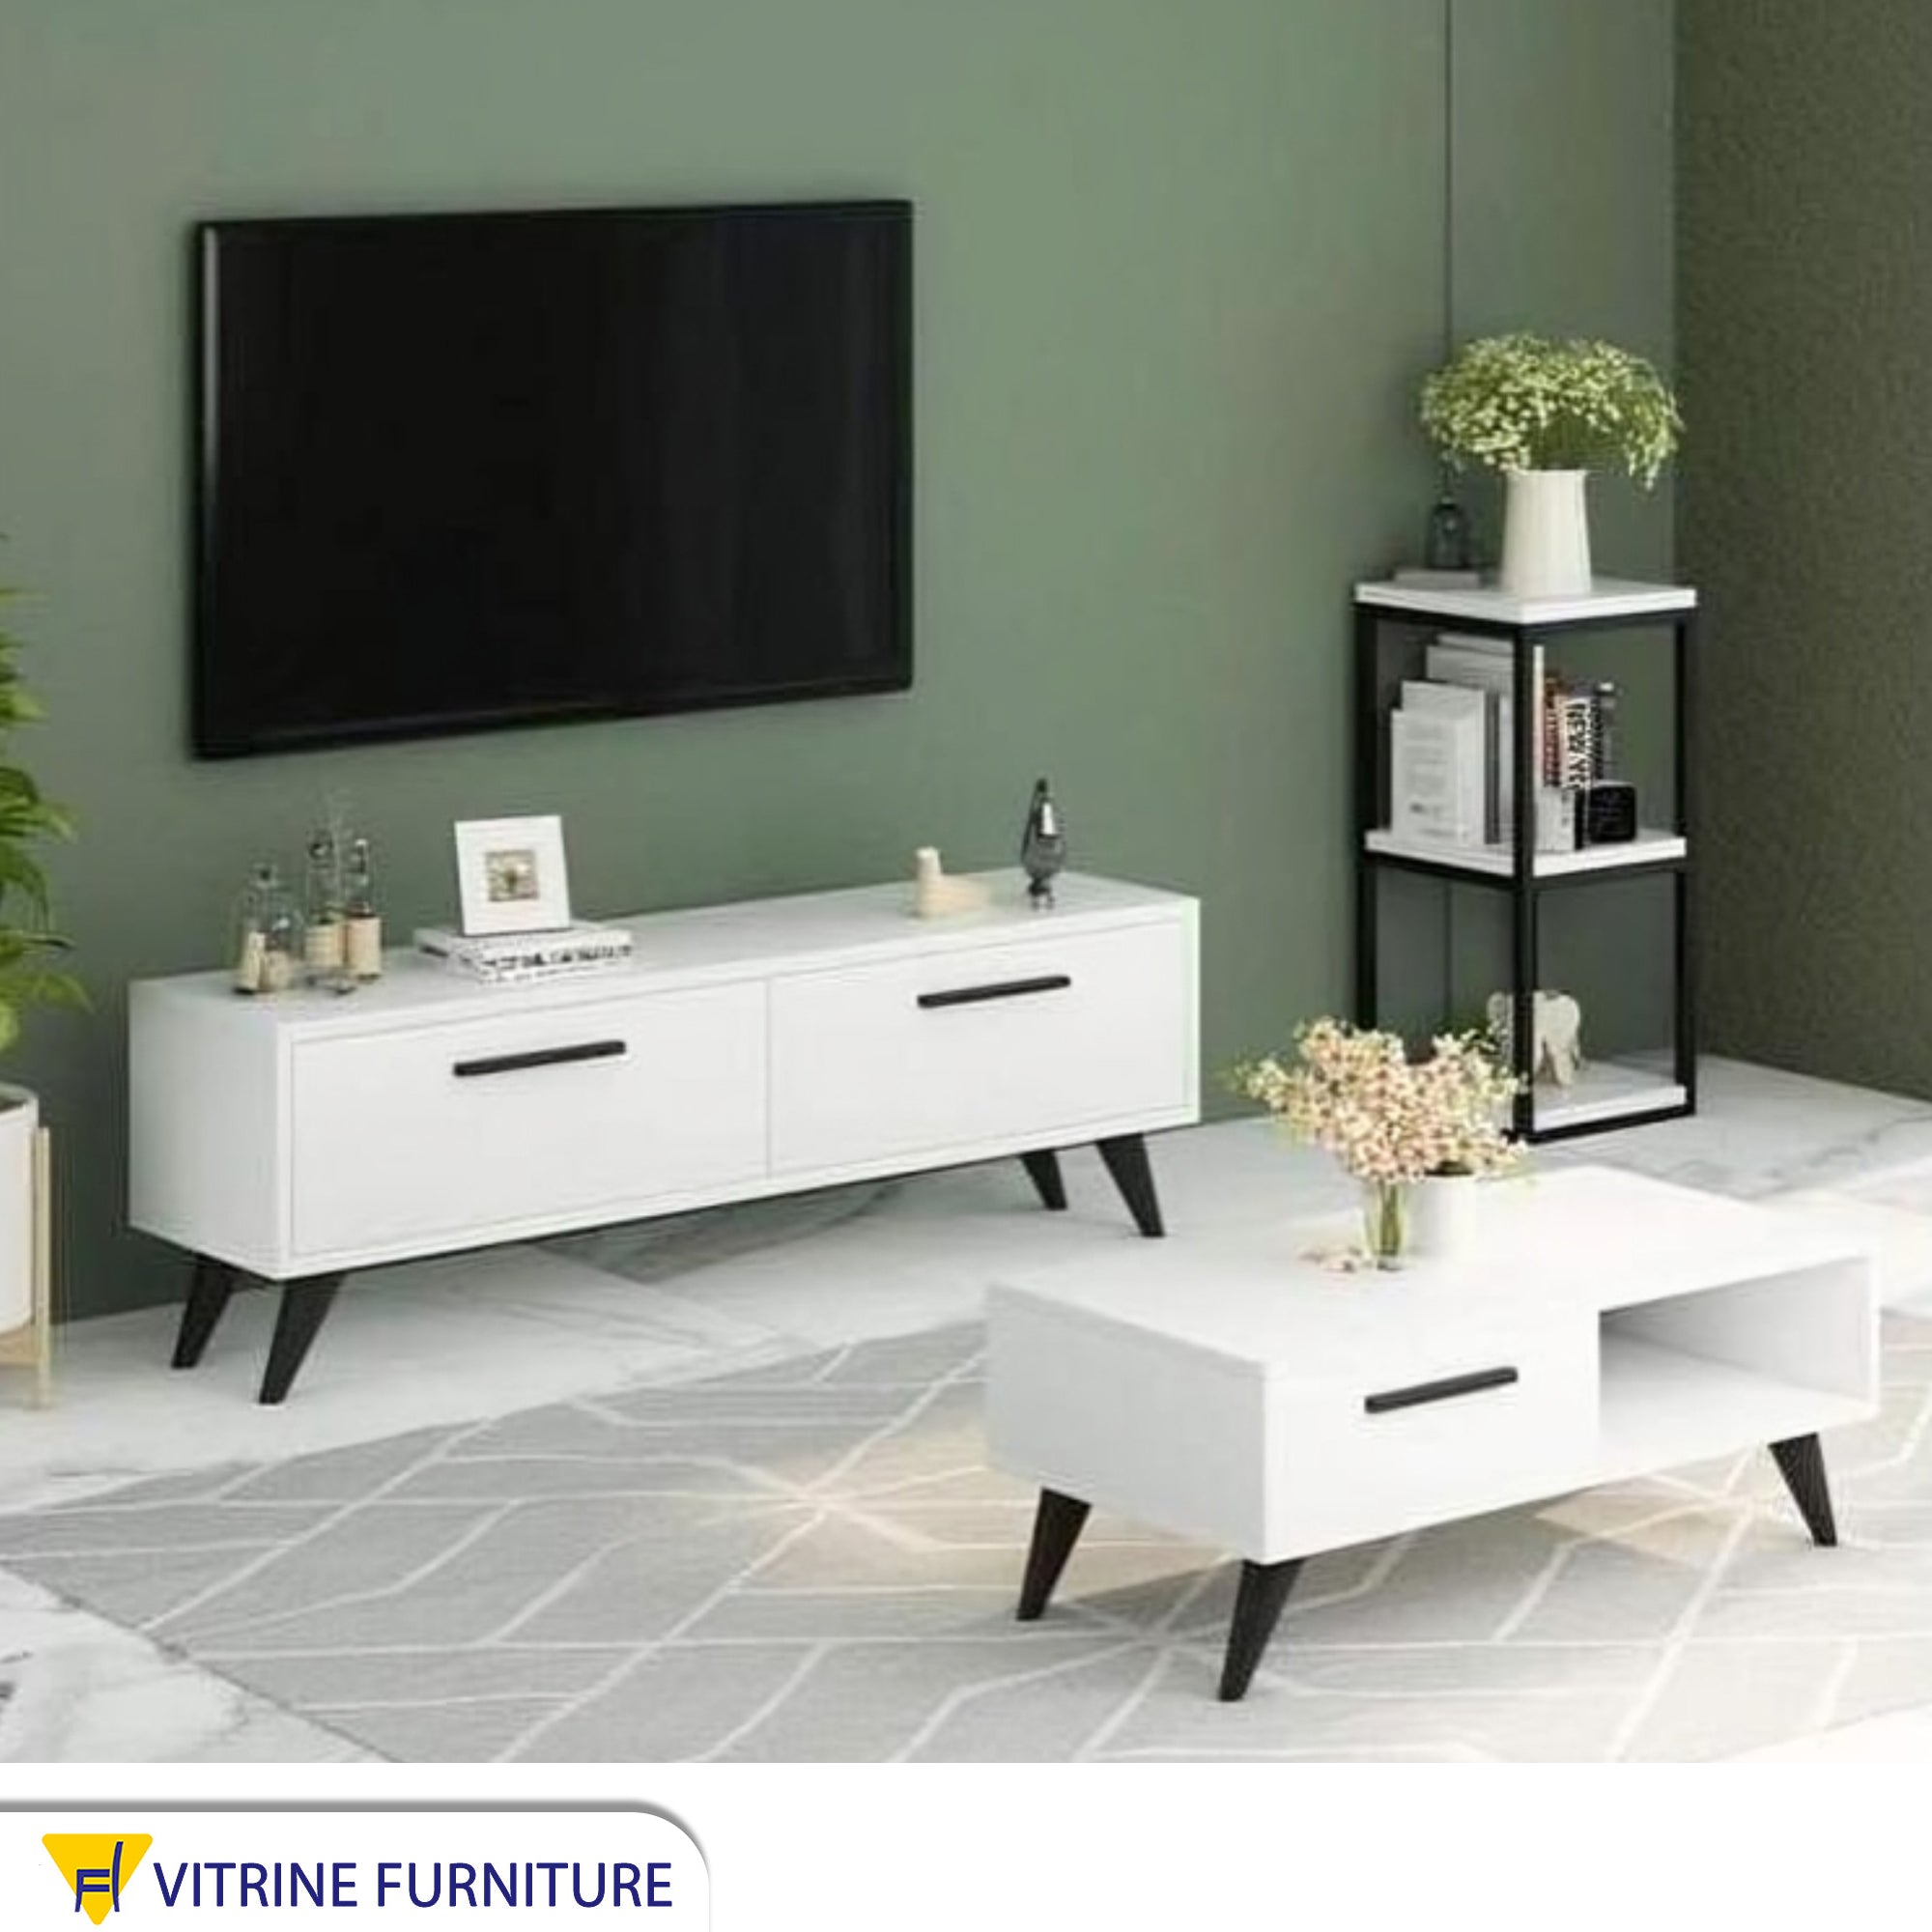 TV cabinet with white coffee table